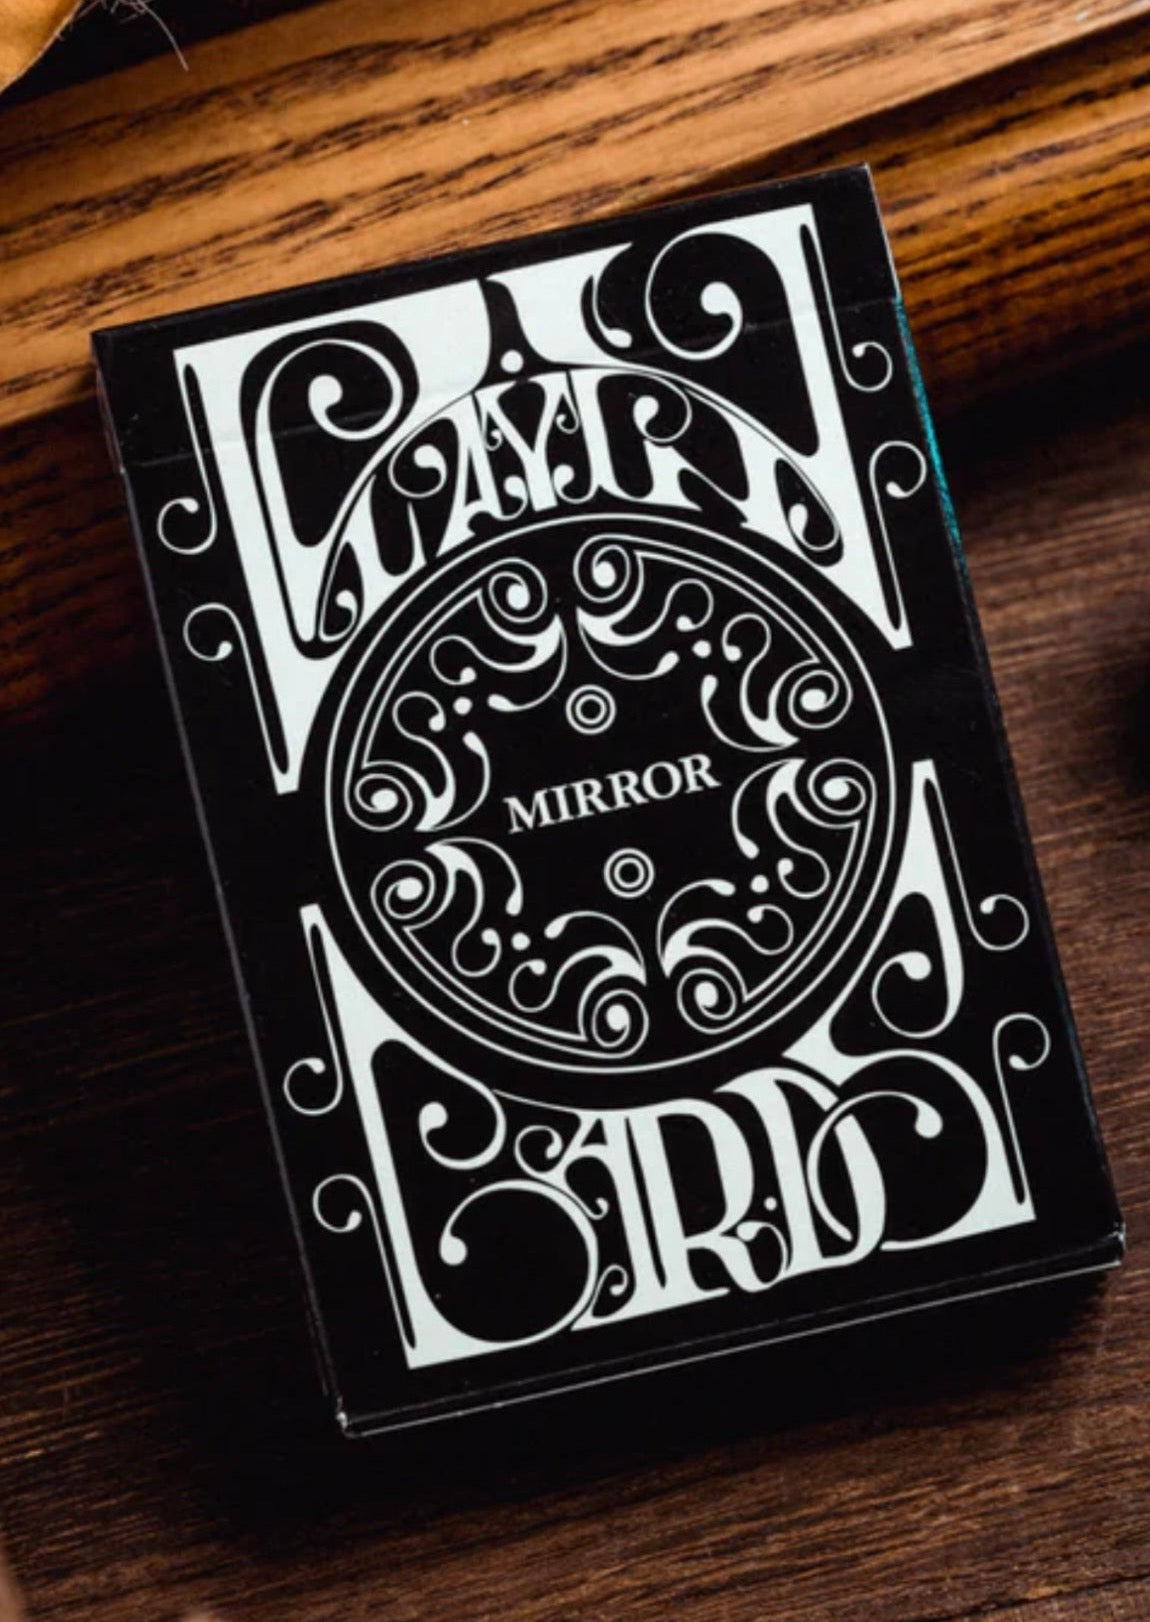 Back in print for the first time in nearly 10 years. The cards feature an updated back design based on the original edition released in 2008, complete with minimal court cards, custom jokers, and an intricate ace of spades.  Printed by the United States Playing Card Company. Available in the original white (Smoke) and black (Mirror)